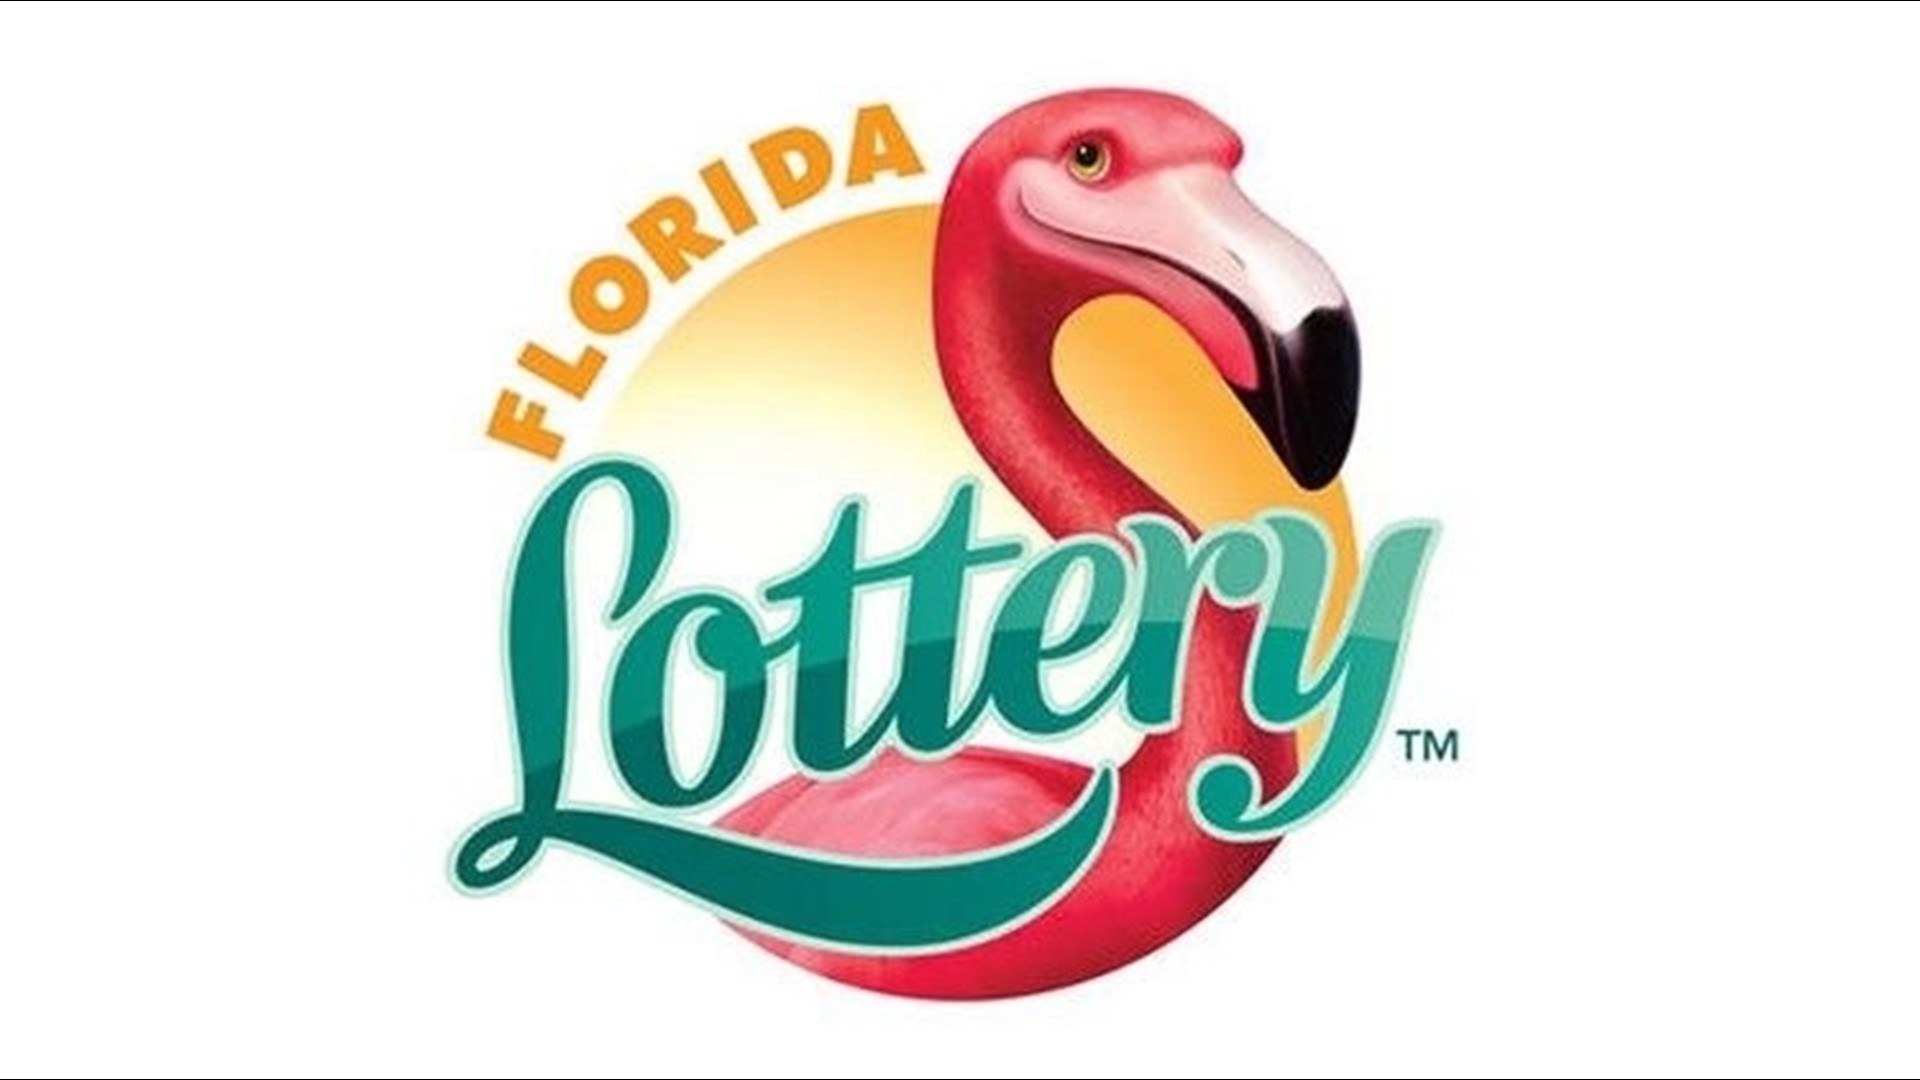 Florida Lottery pushes back draw times for PICK daily games